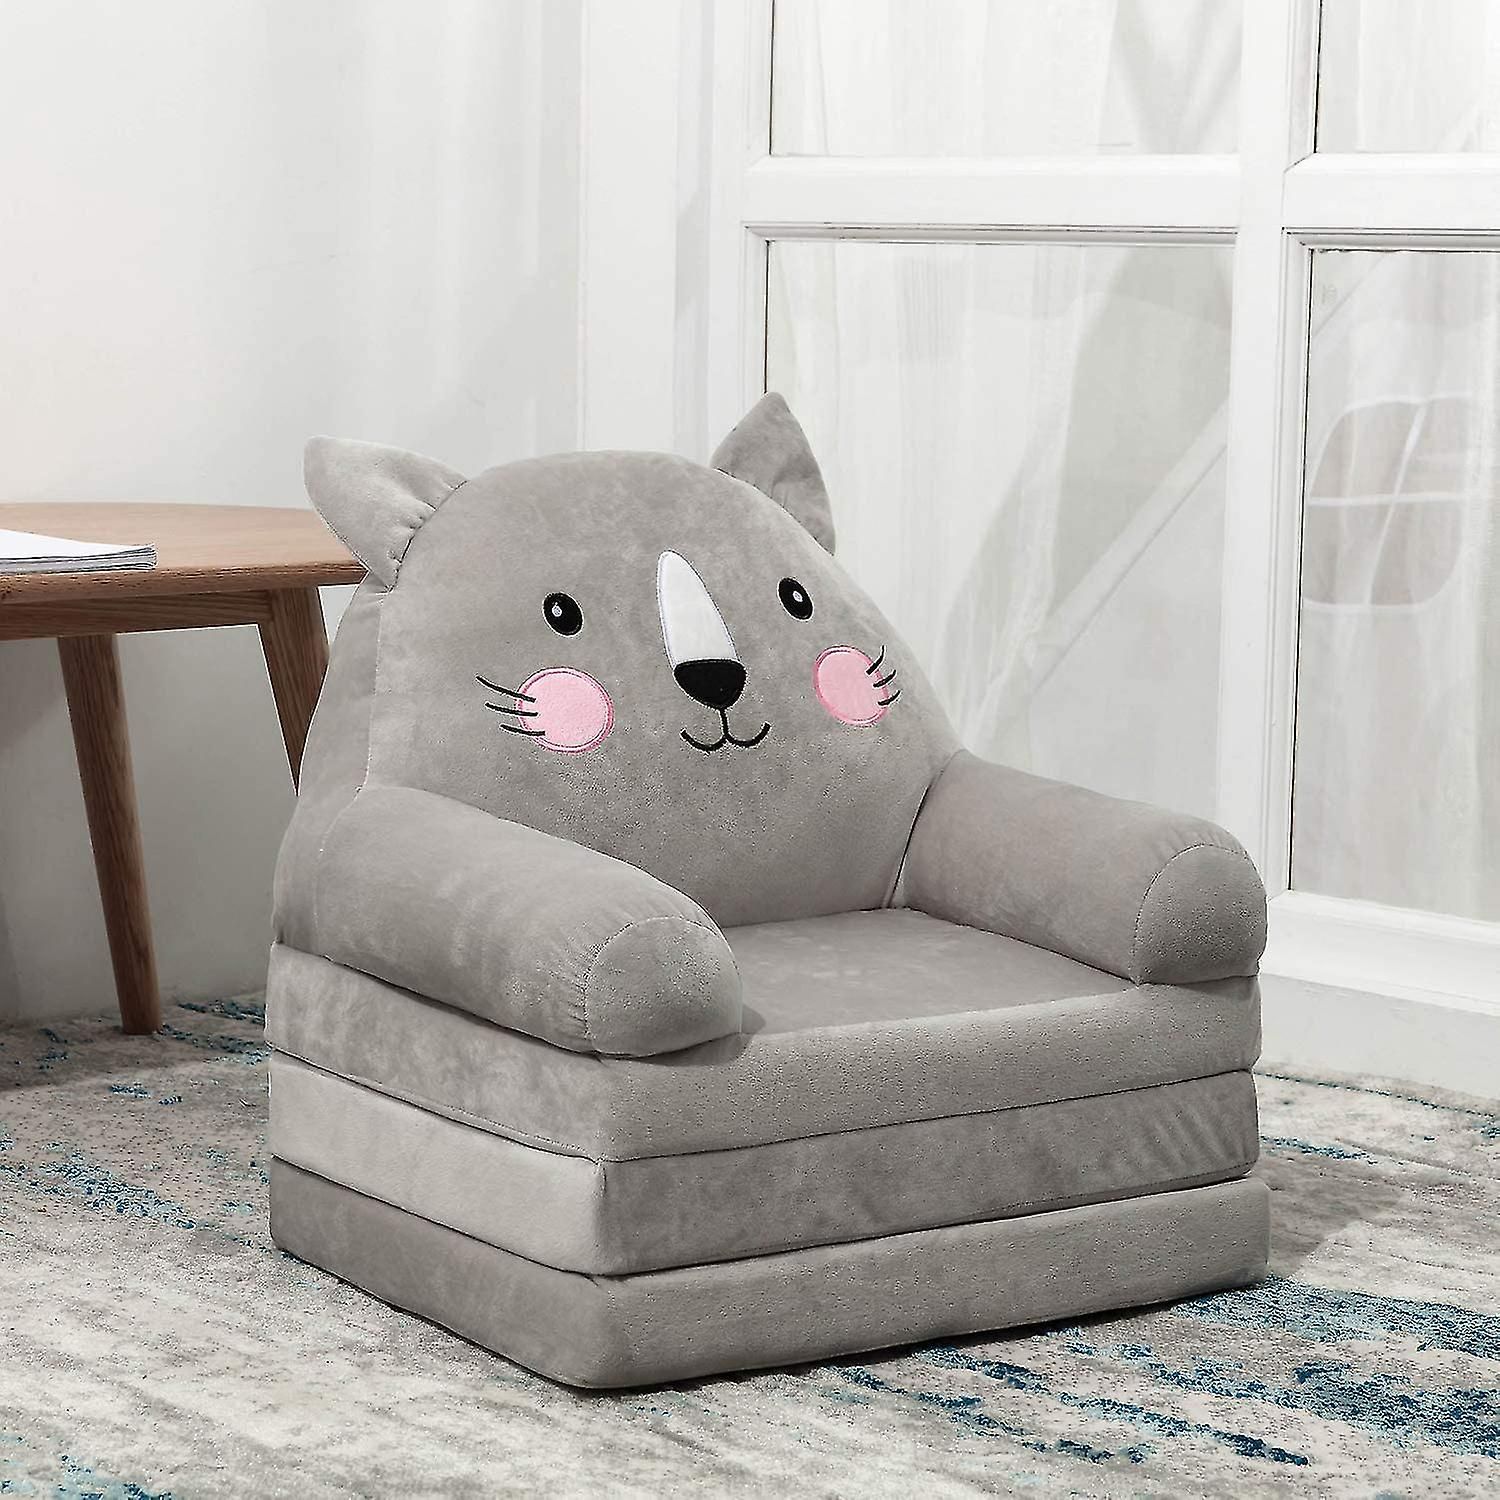 Cartoon Foldable Kids Sofa, Plush Cat Shape Children Couch Backrest Armchair  Bed With Pocket, Upholstered 2 In 1 Flip Open Couch | Fruugo It For 2 In 1 Foldable Children'S Sofa Beds (View 3 of 15)